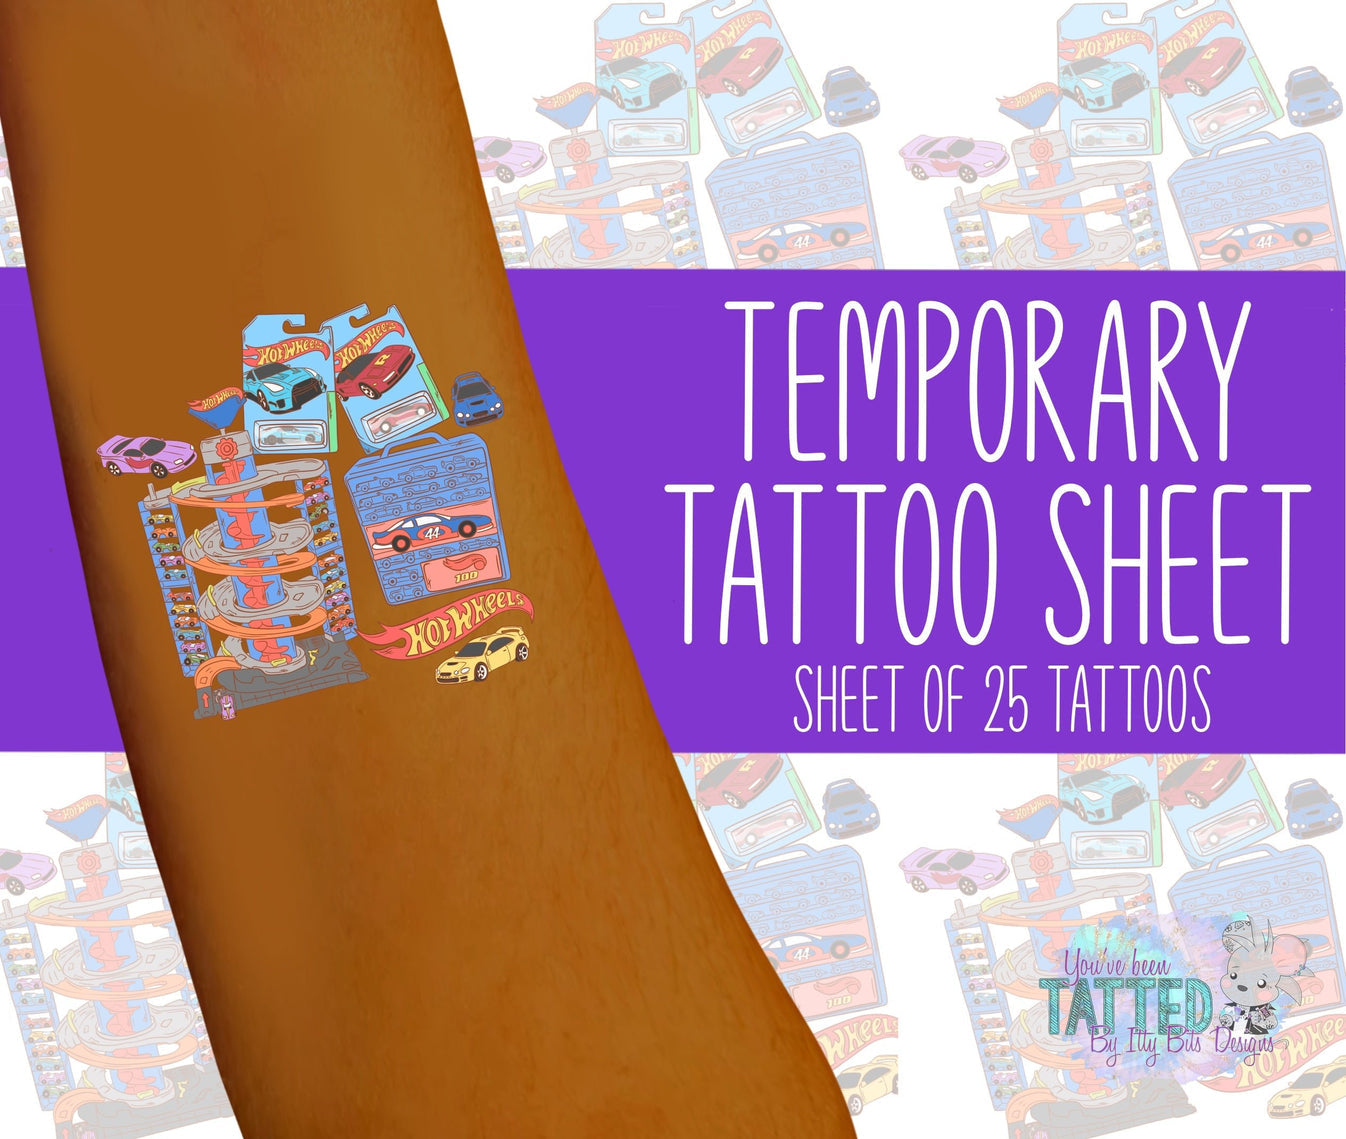 Hot Toy Cars By Pixelcass Temporary Tattoos